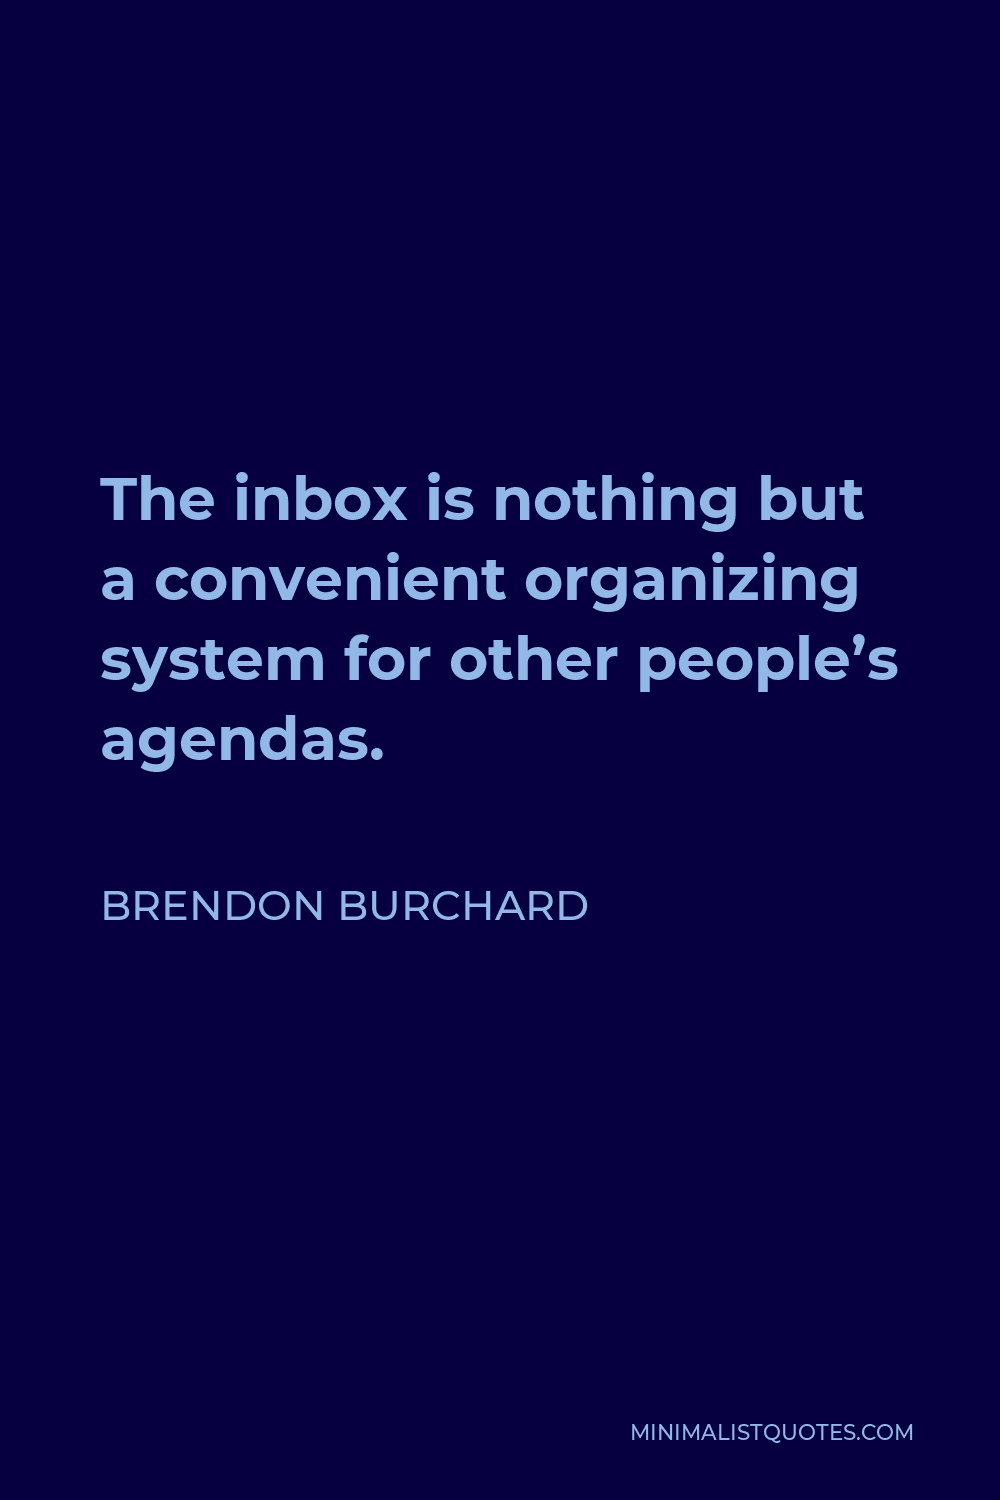 Brendon Burchard Quote - The inbox is nothing but a convenient organizing system for other people’s agendas.